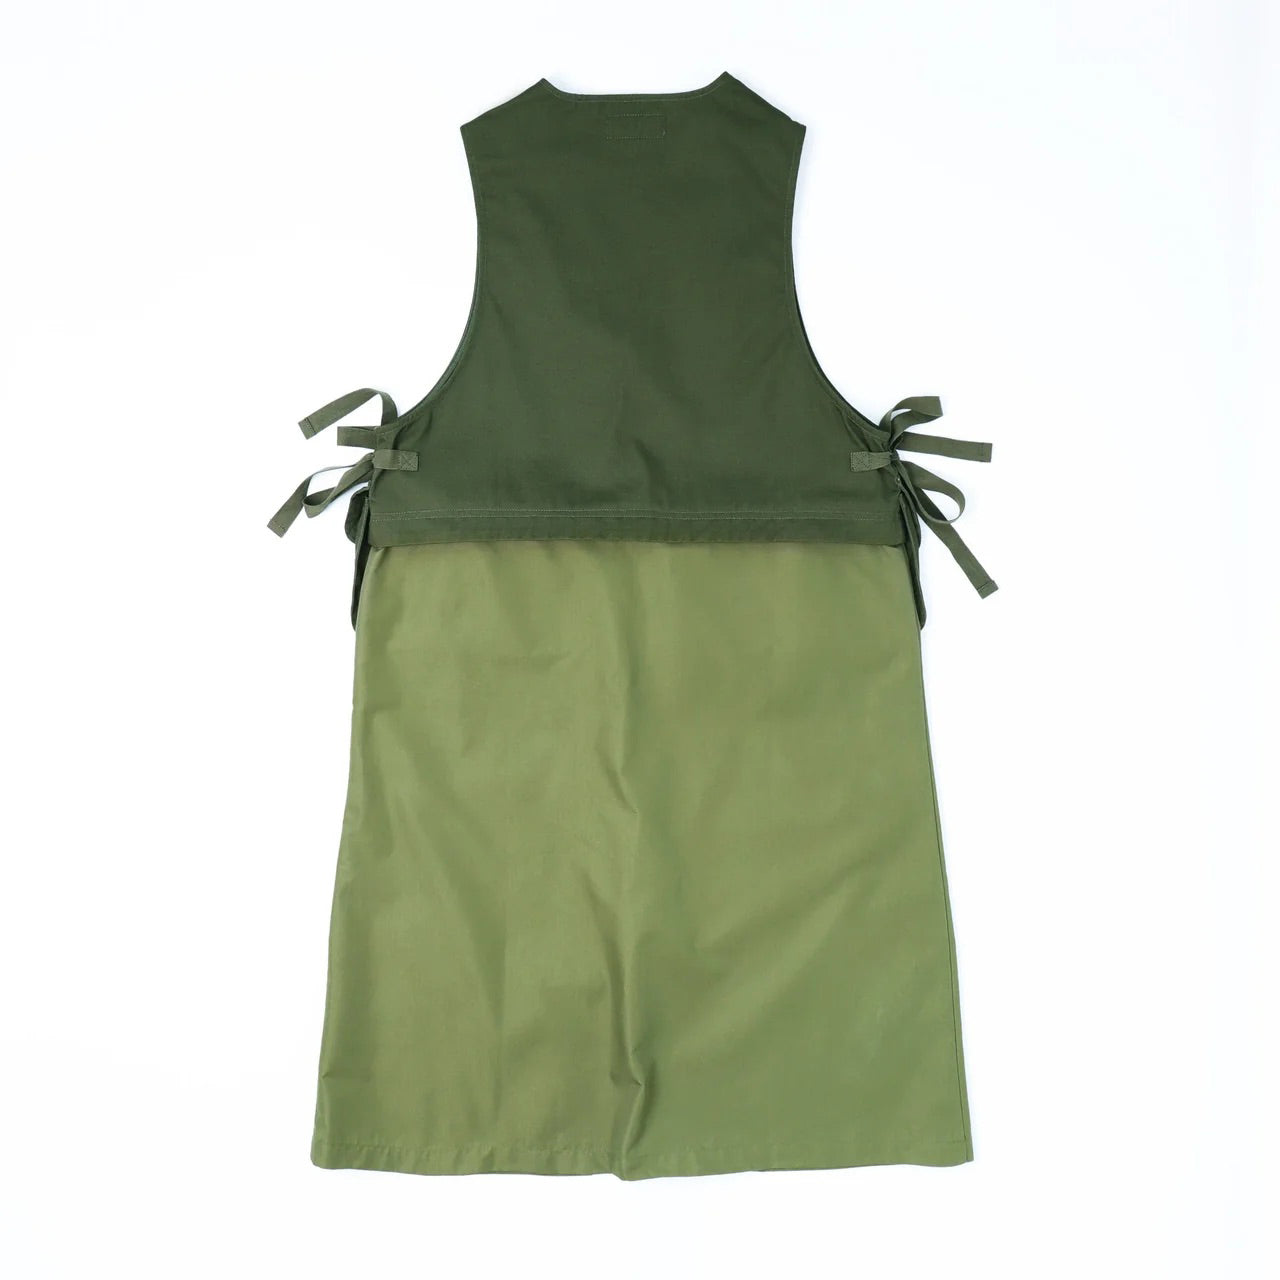 No:#616 | Name:FW23-MRS.WORKWARE FIELD ONE PIECE | Color:Green | Size:Free【WORKWARE】【入荷予定アイテム・入荷連絡可能】